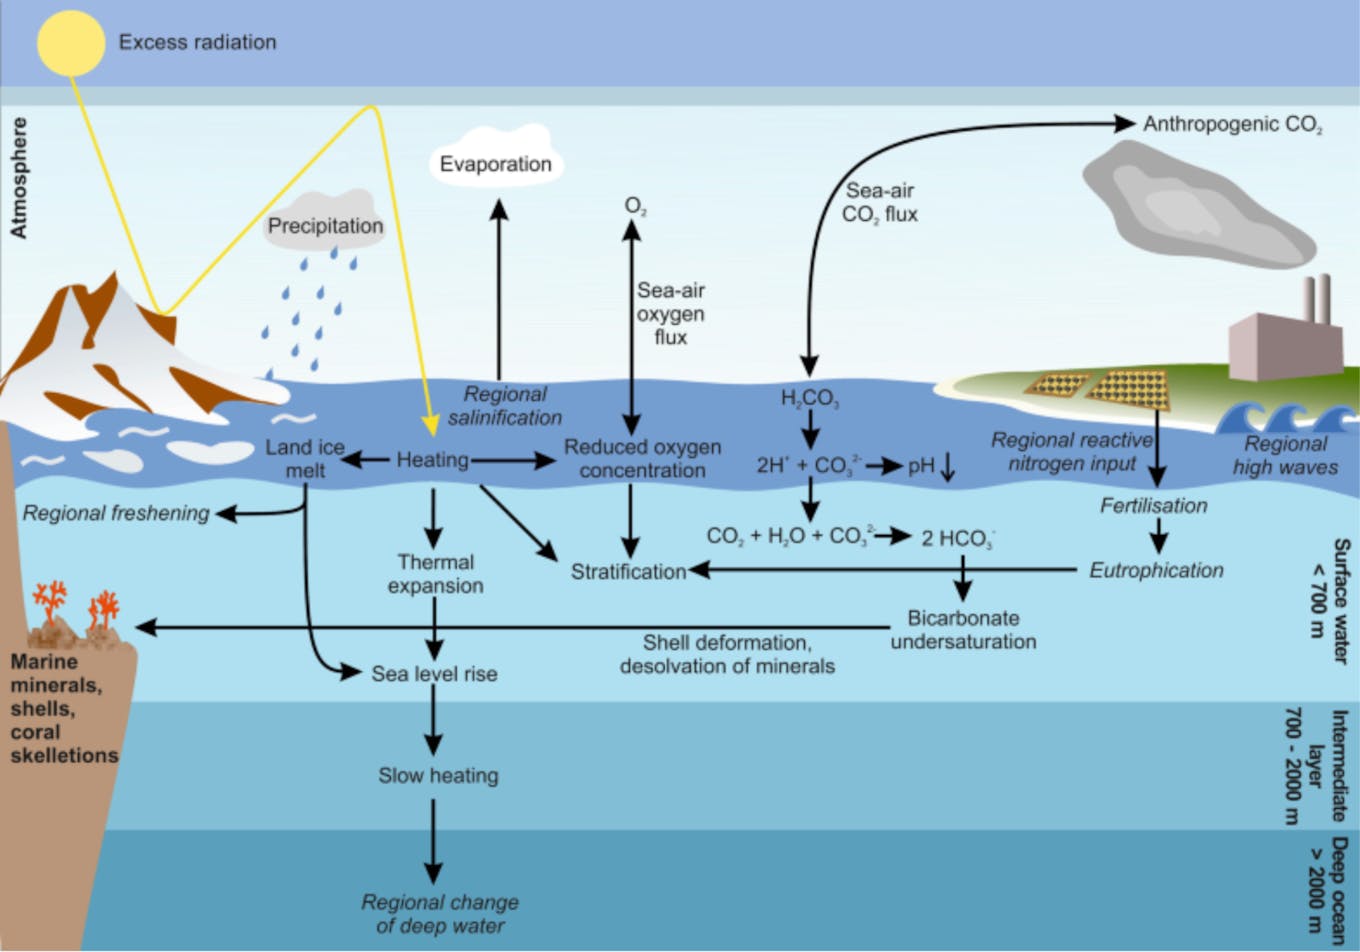 Overview of climatic changes and their effects on the oceans.